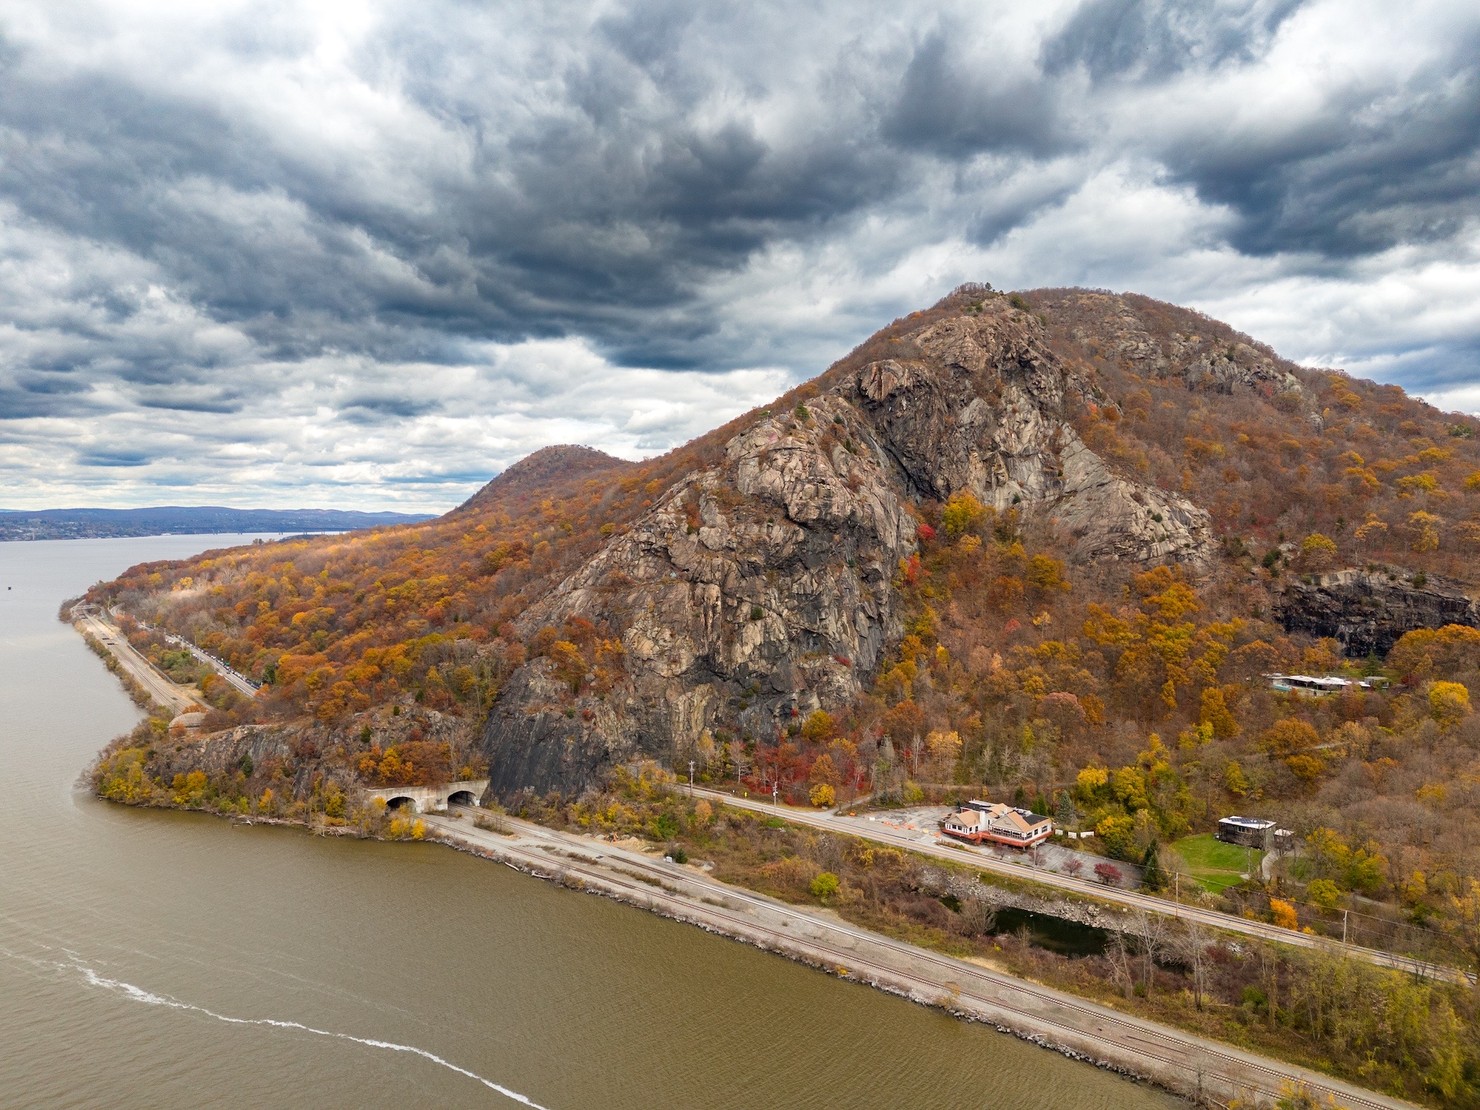 Breakneck Ridge as captured by drone, featuring a cloudy sky and orange leaves. Train tracks are in the foreground.